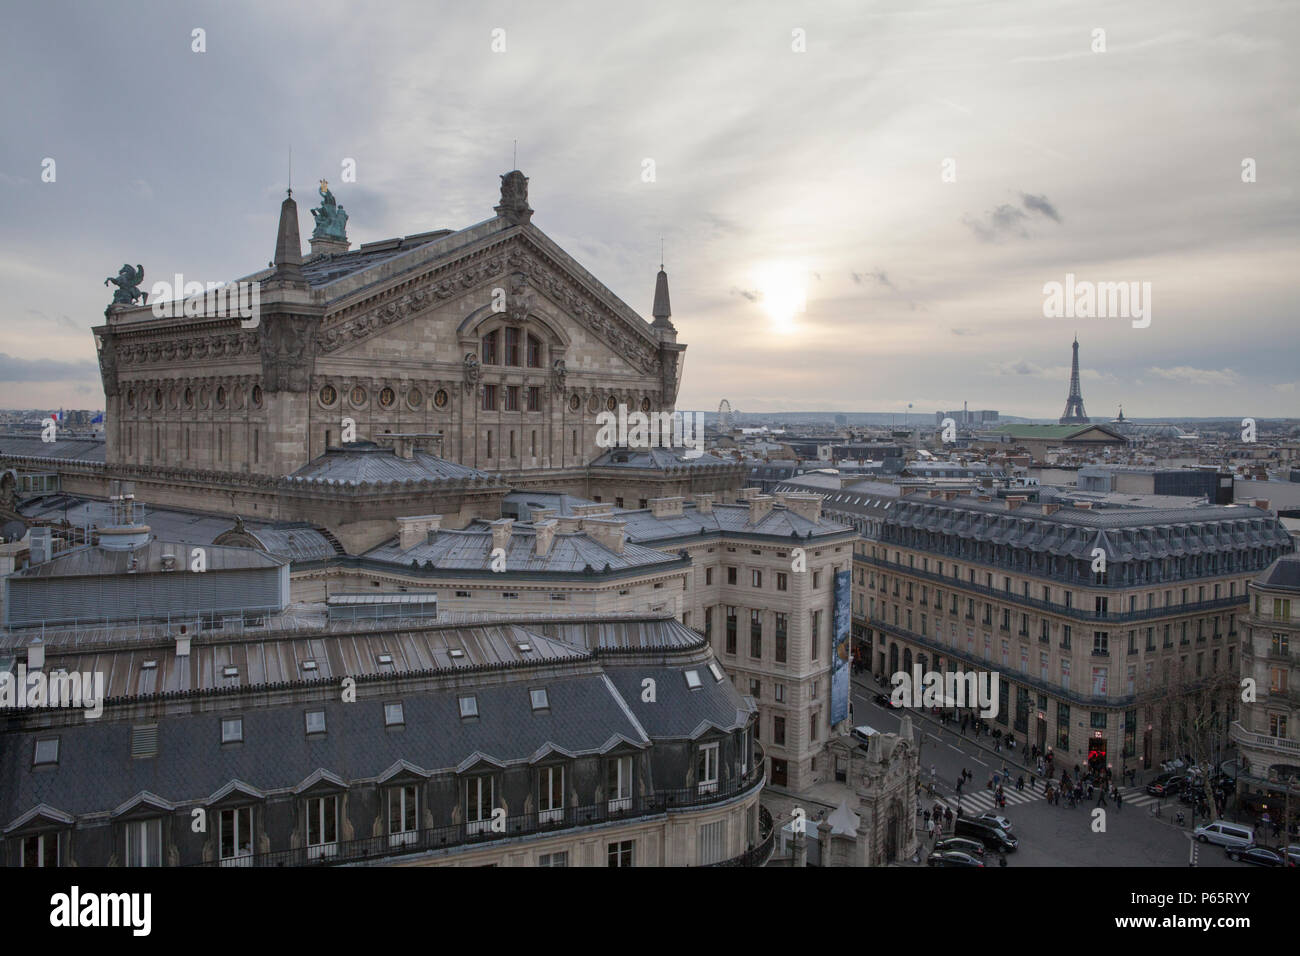 Rooftop view of the Palais Garnier Opera House in Paris France with the Eiffel Tower in the distance Stock Photo